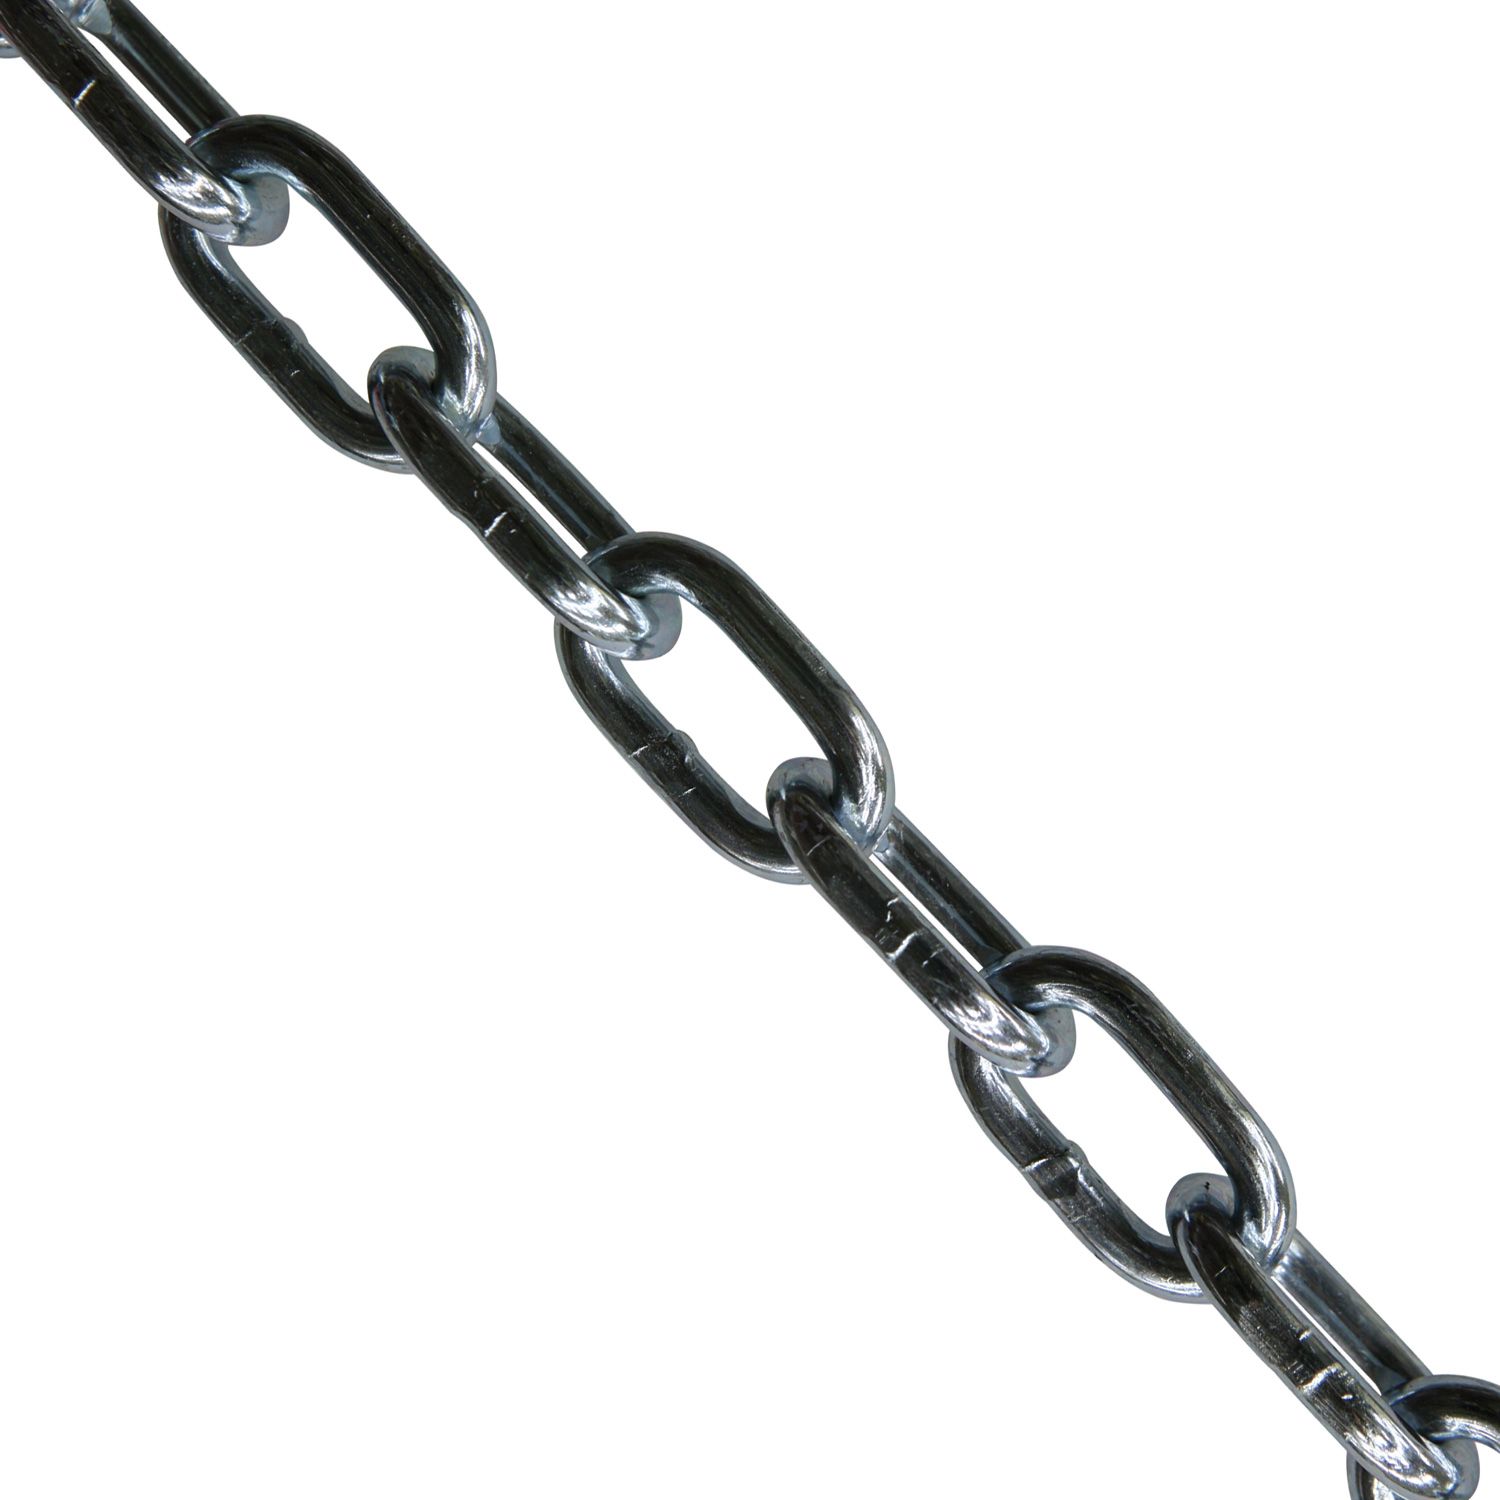 Campbell 0143526 System 3 Grade 30 Low Carbon Steel Proof Coil Chain in Square Pail Zinc Plated 1900 lbs Load Capacity 5/16 Trade 0.31 Diameter 75' Length Campbell Chain 75 Length 0.31 Diameter 5/16 Trade 